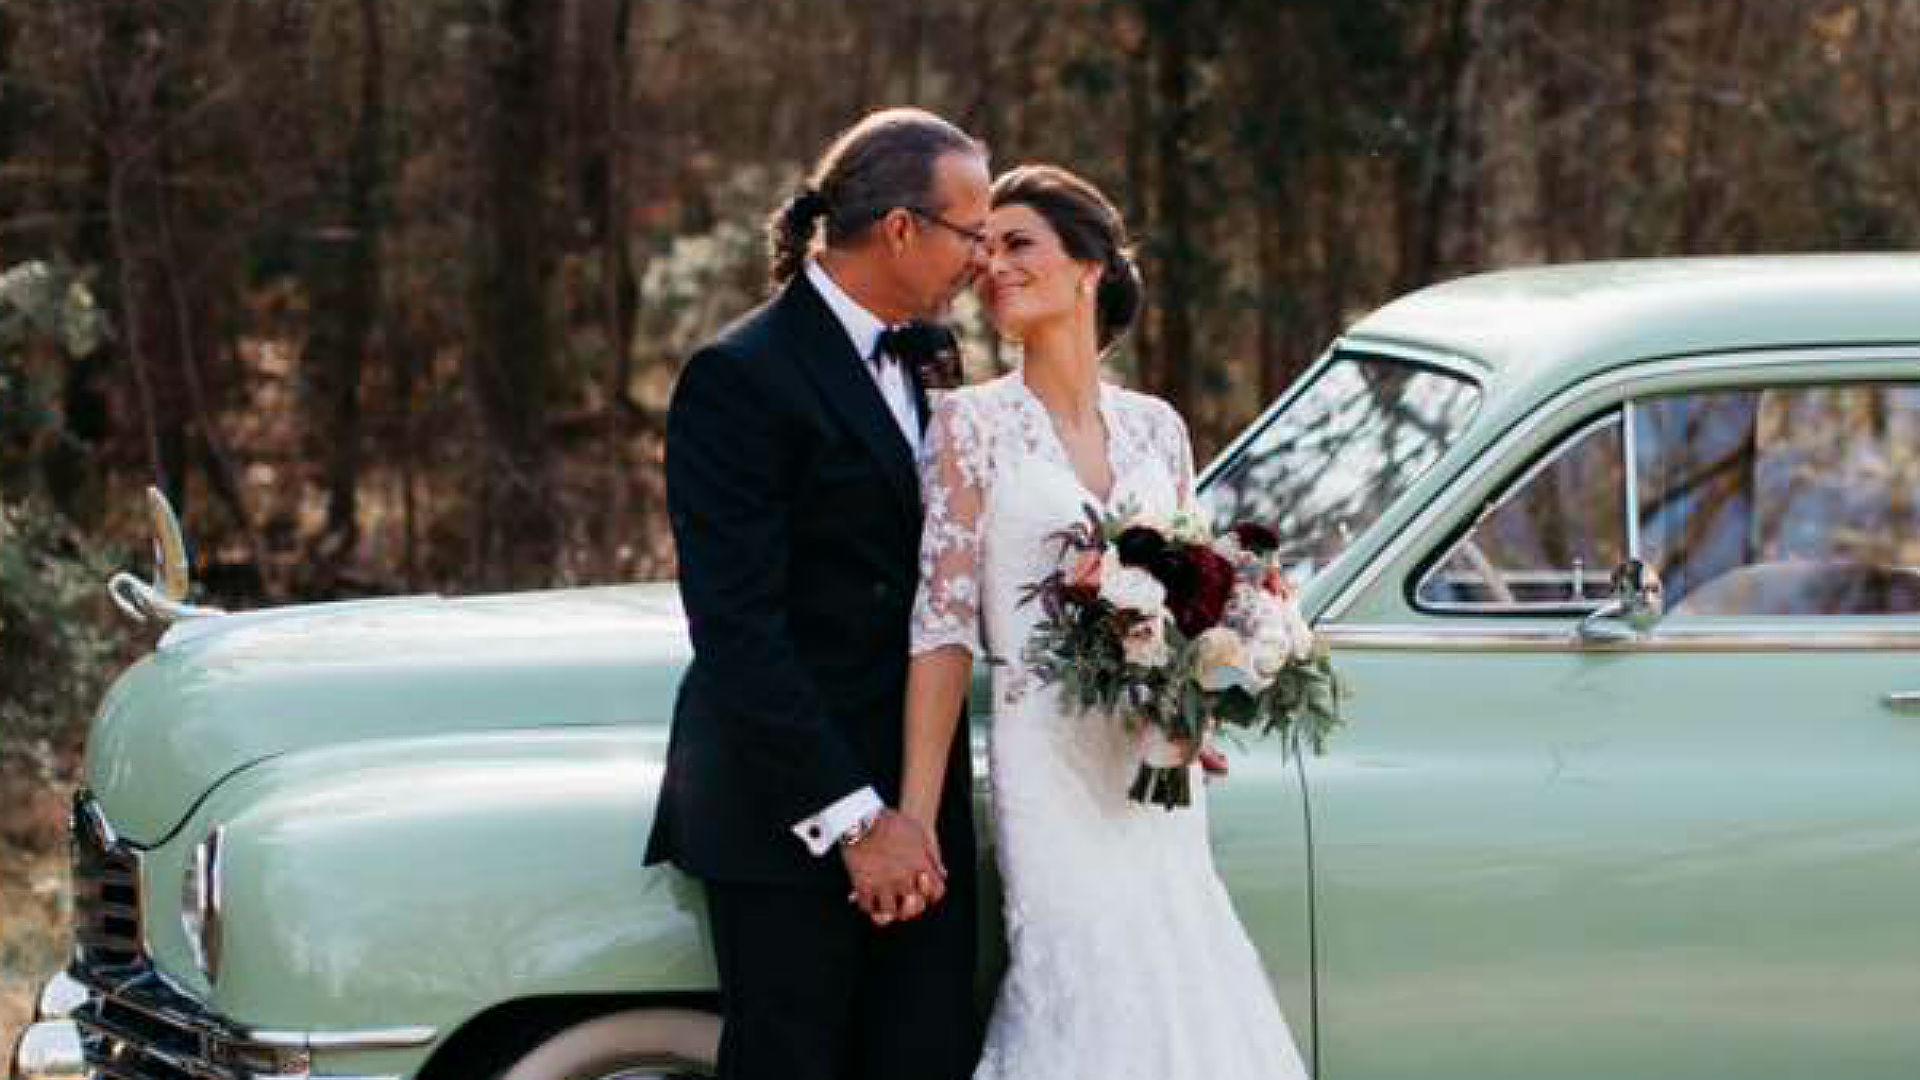 Kyle Petty marries director of his charity motorcycle ride | NASCAR | Sporting News1920 x 1080